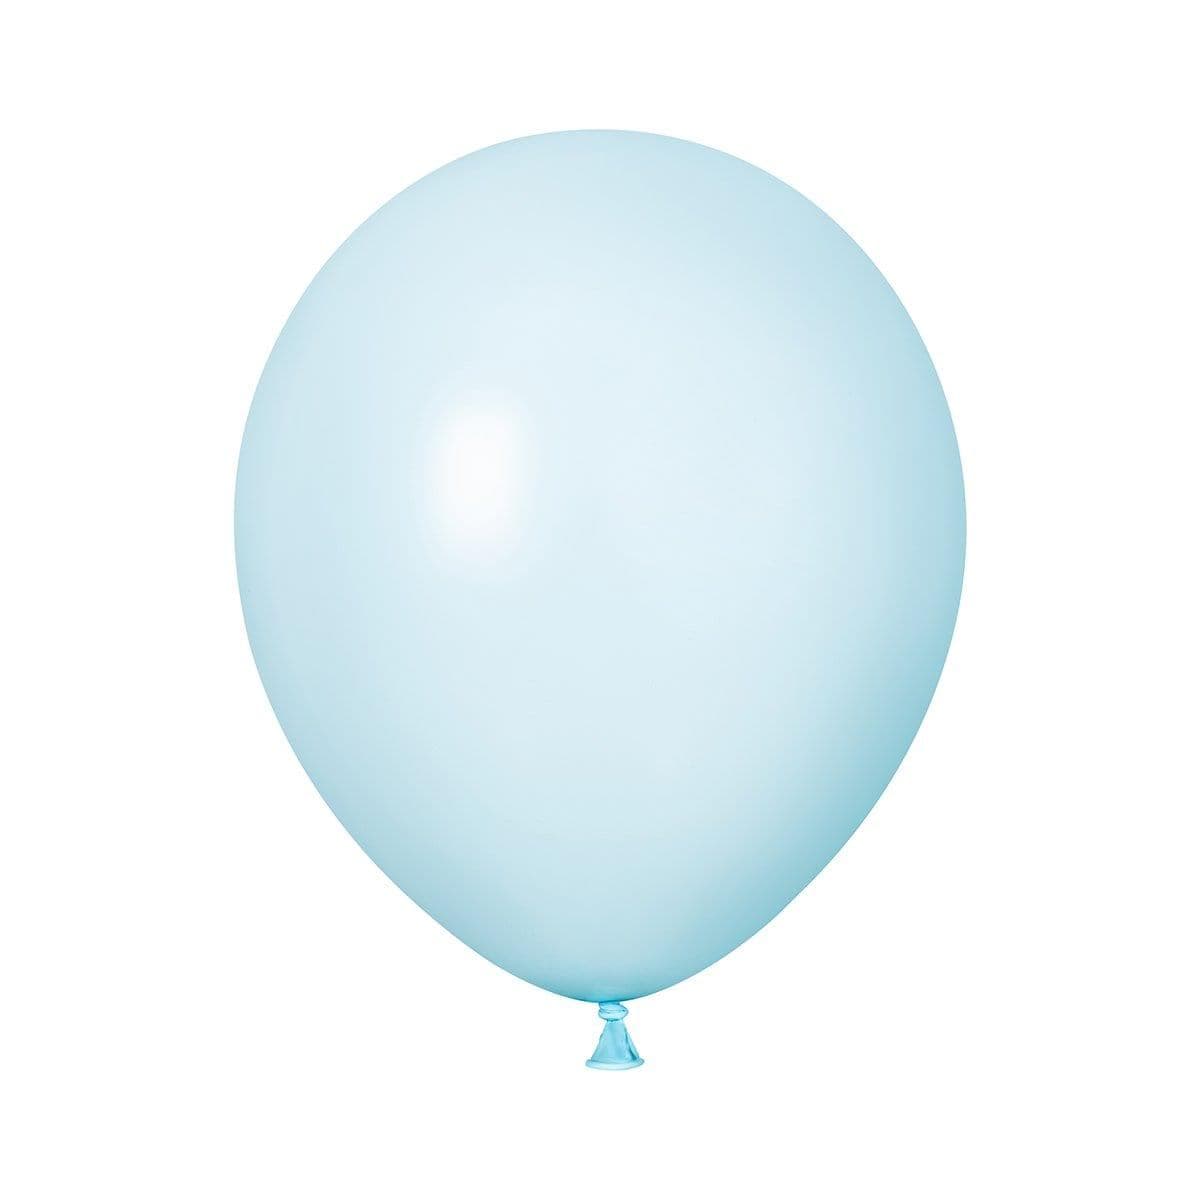 Buy Balloons Baby Blue Latex Balloon 12 Inches, 72 Count sold at Party Expert